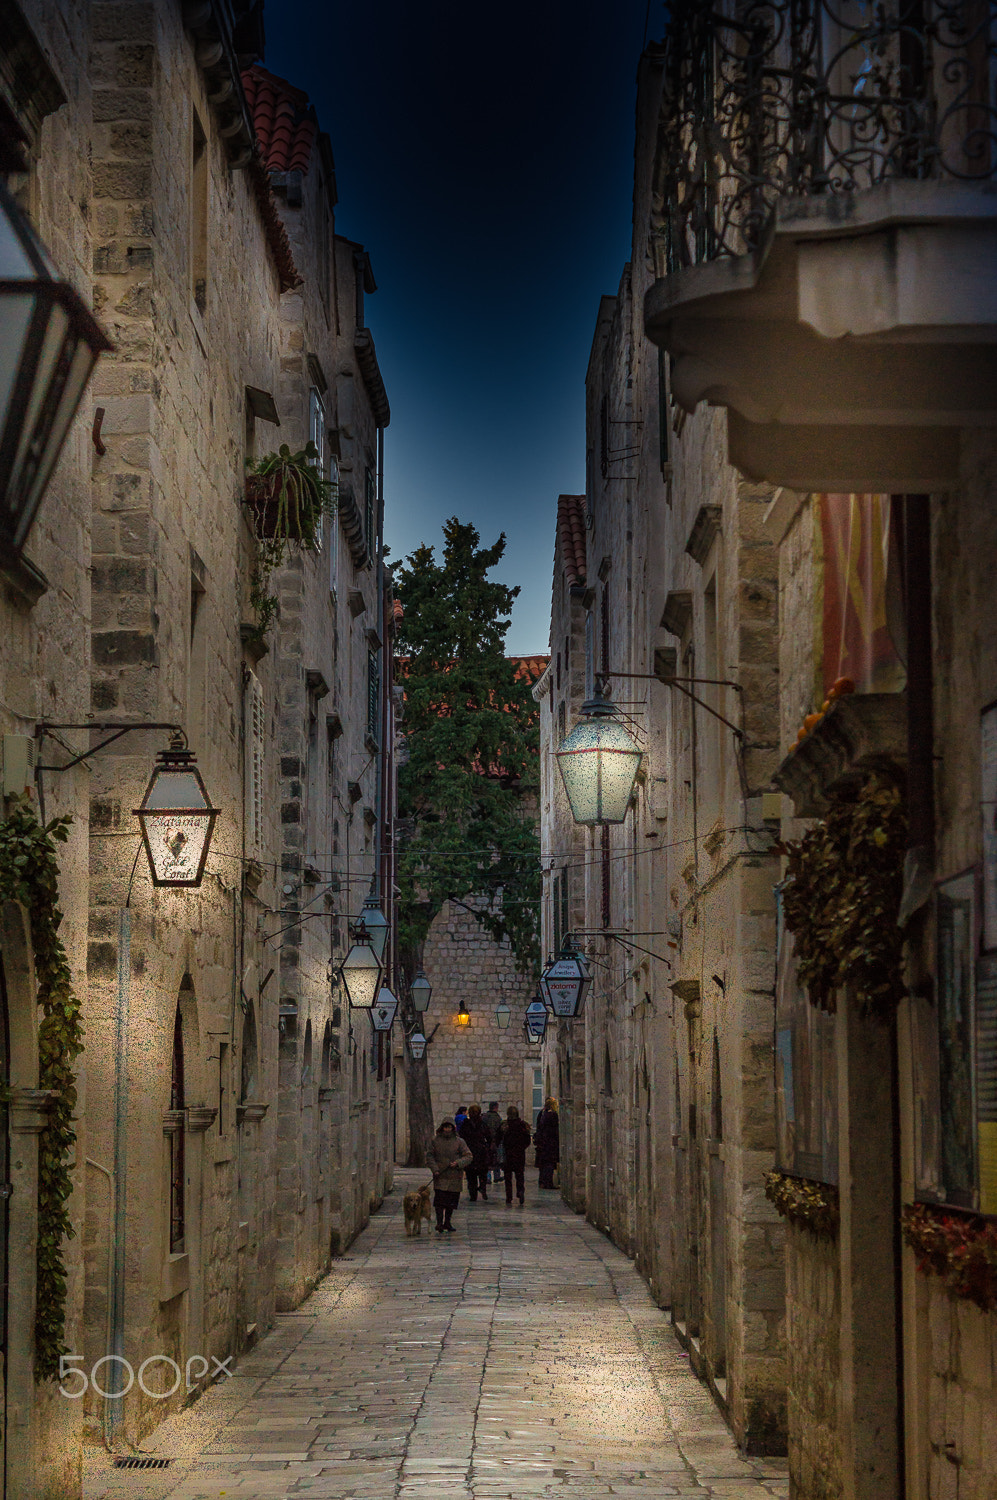 Sony SLT-A35 + Sony DT 50mm F1.8 SAM sample photo. Hr, dubrovnik, old town: street at night photography